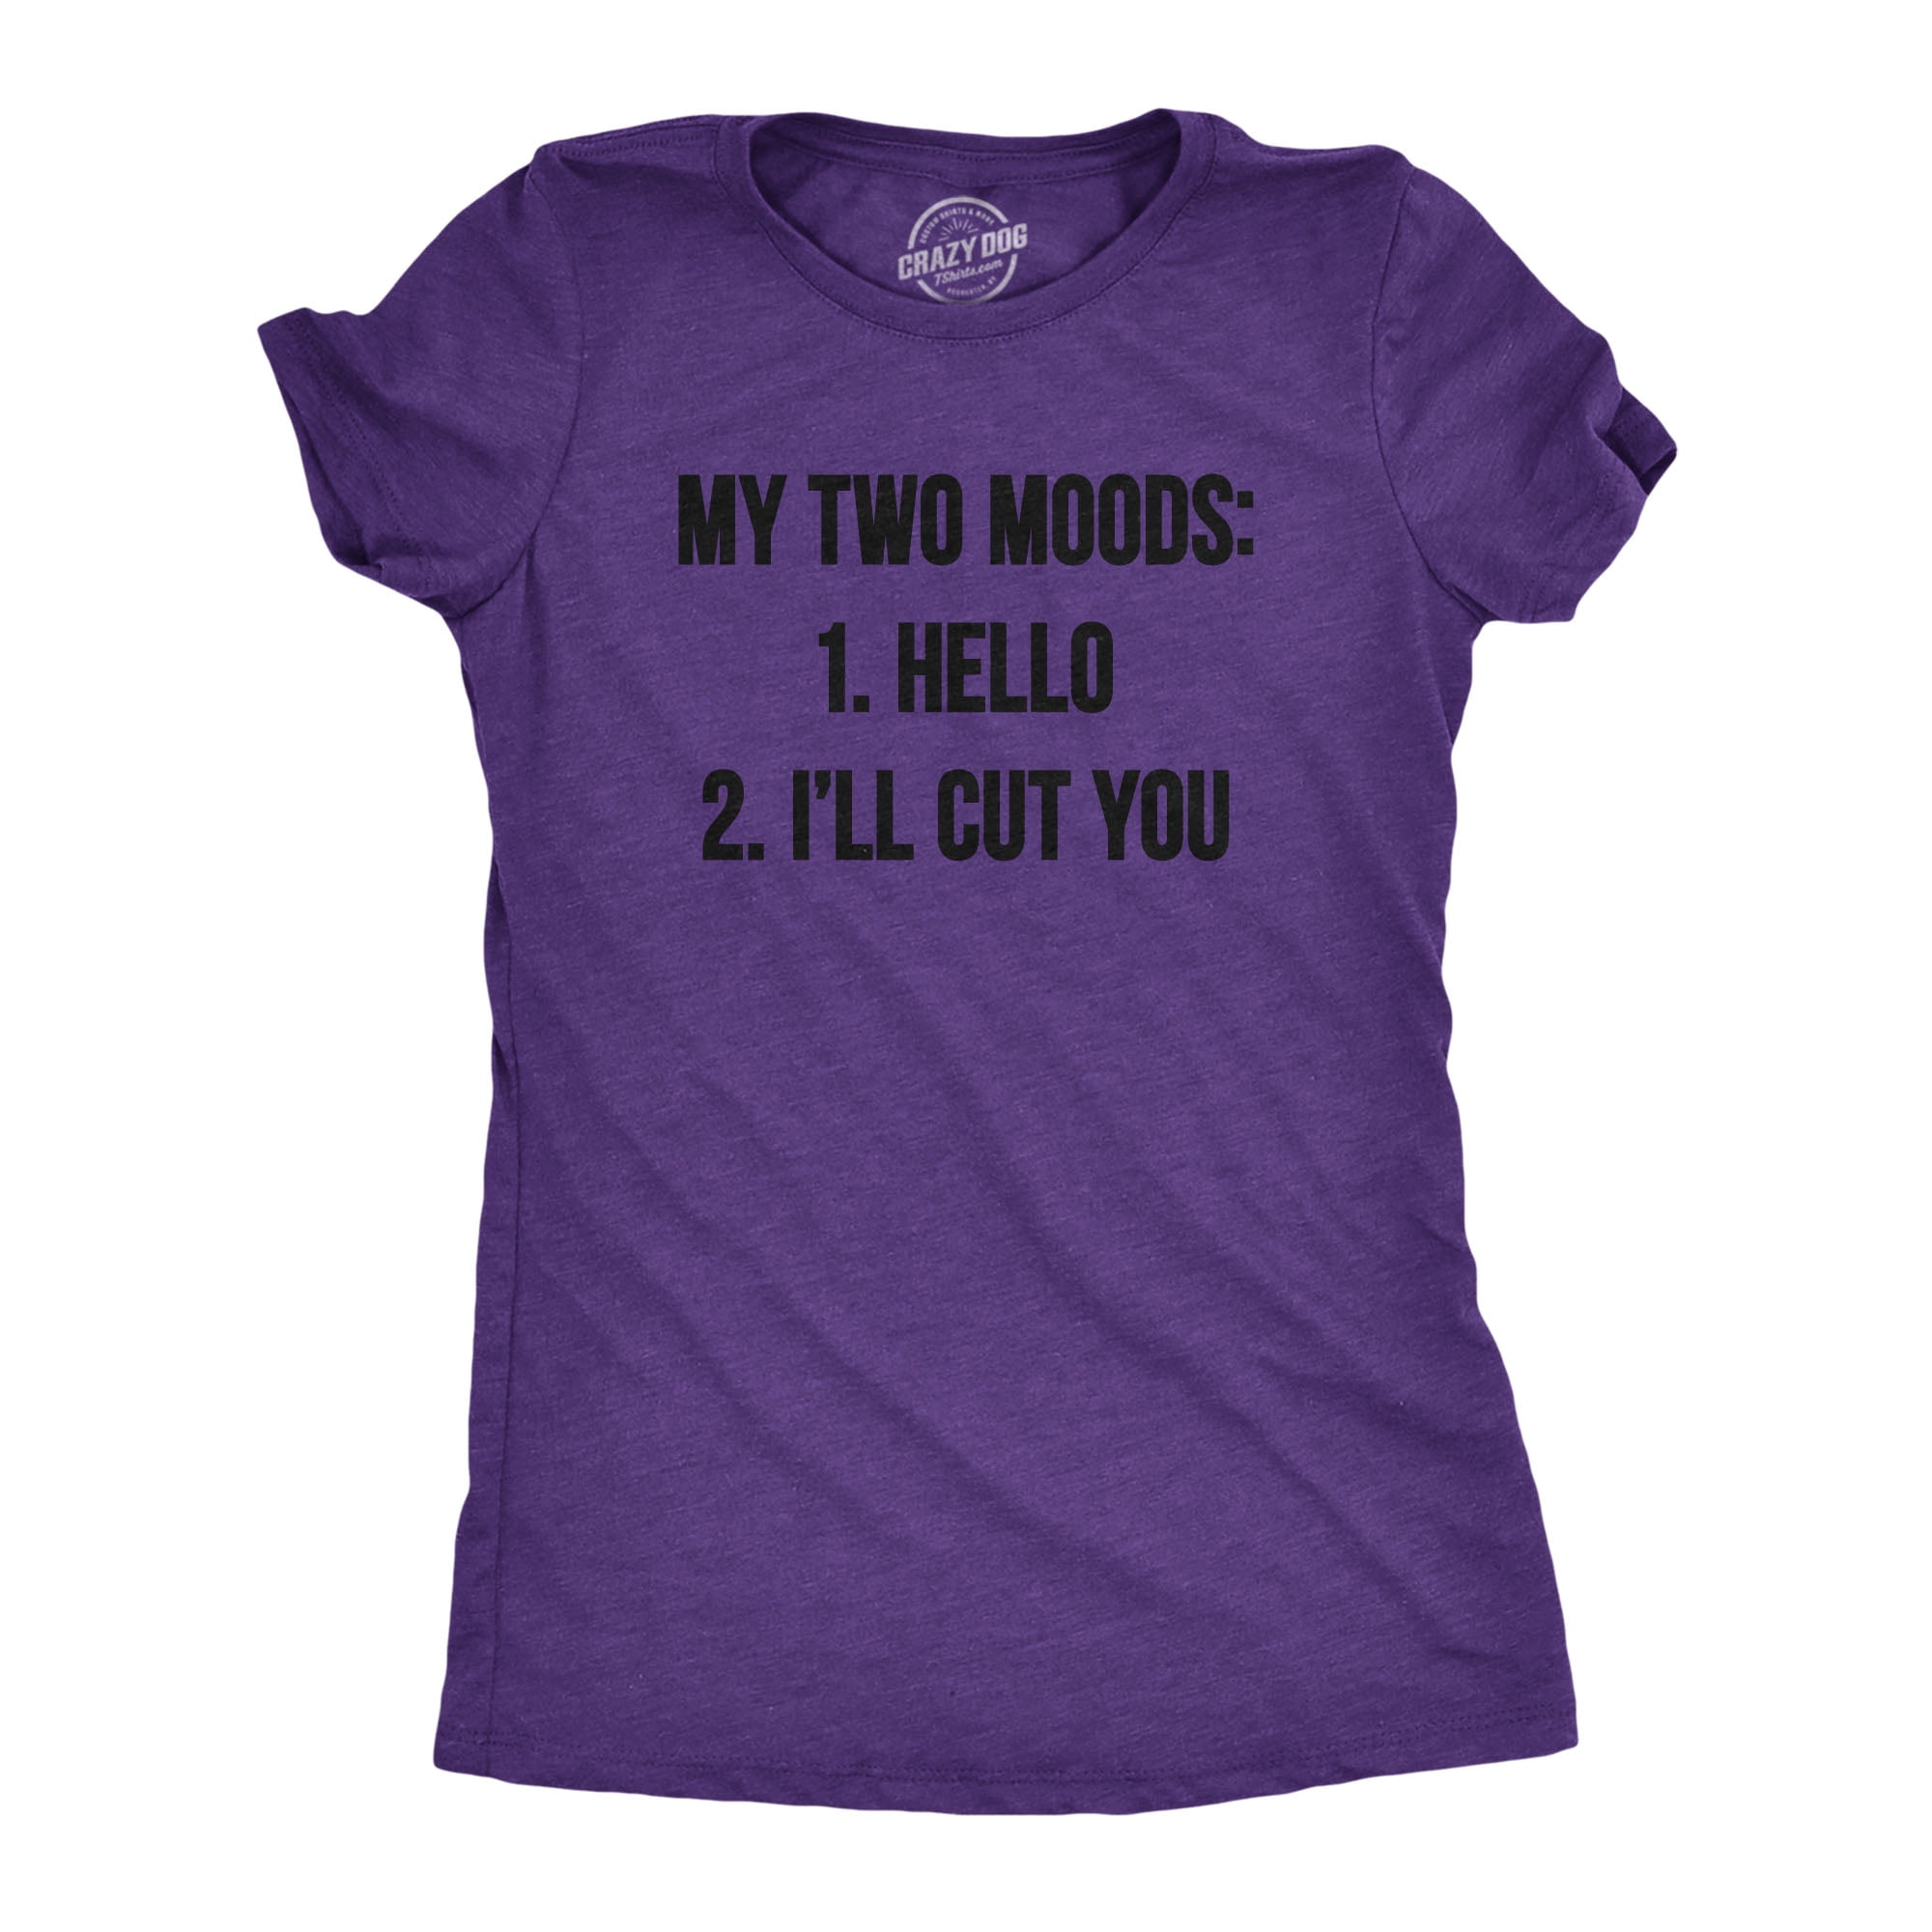 Crazy Dog Tshirts Womens My Two Moods Funny T Shirt Novelty Humor Sarcastic Cool Graphic Hilarious Camiseta para Mujer 